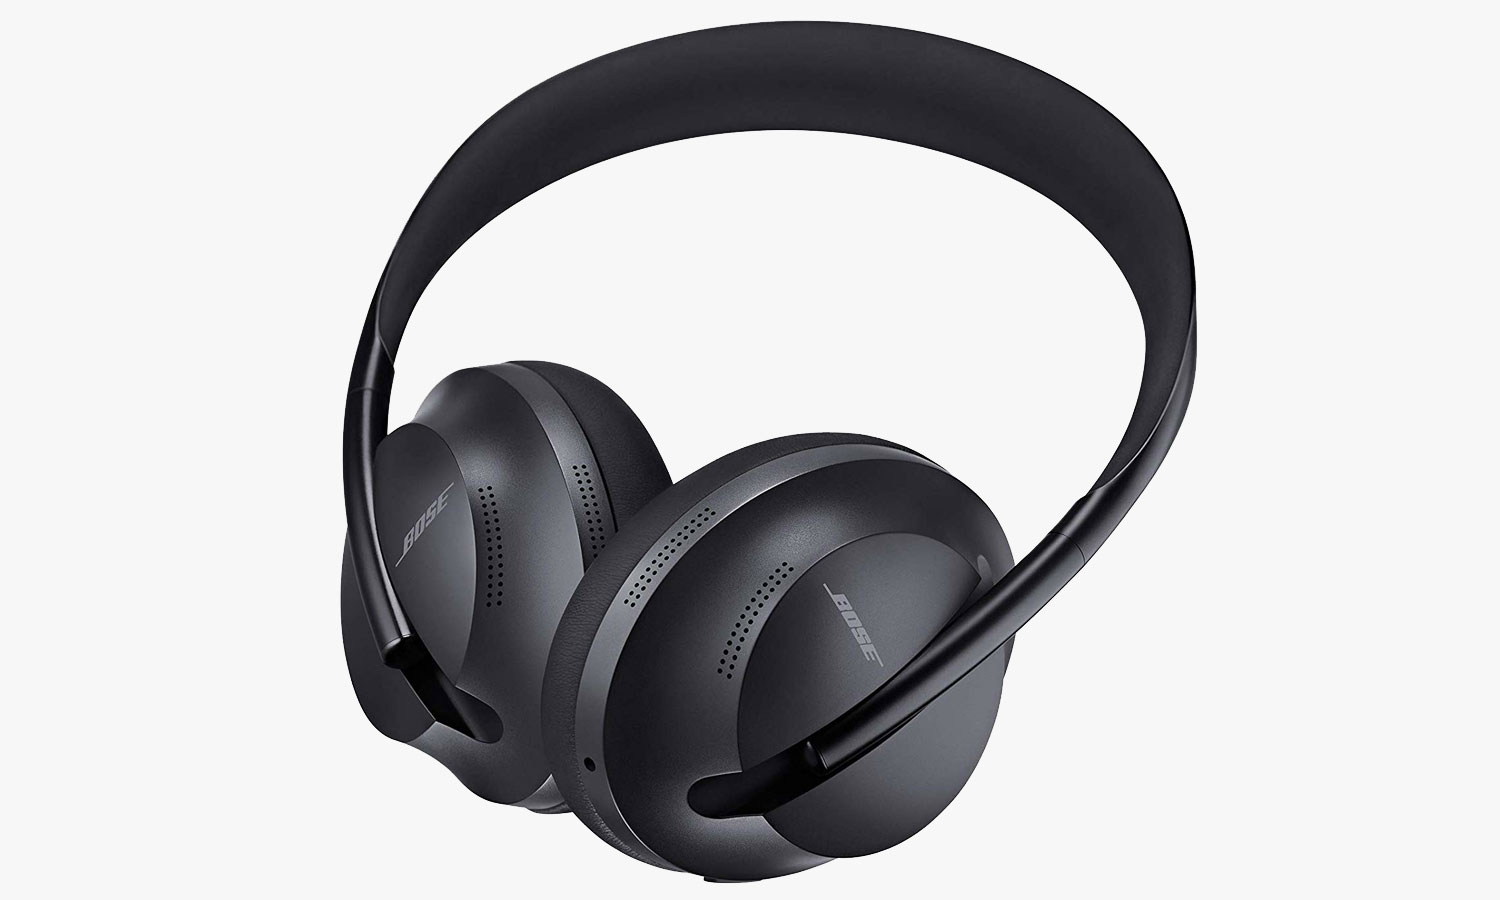 Bose Makes the Smartest Noise Cancelling Headphones